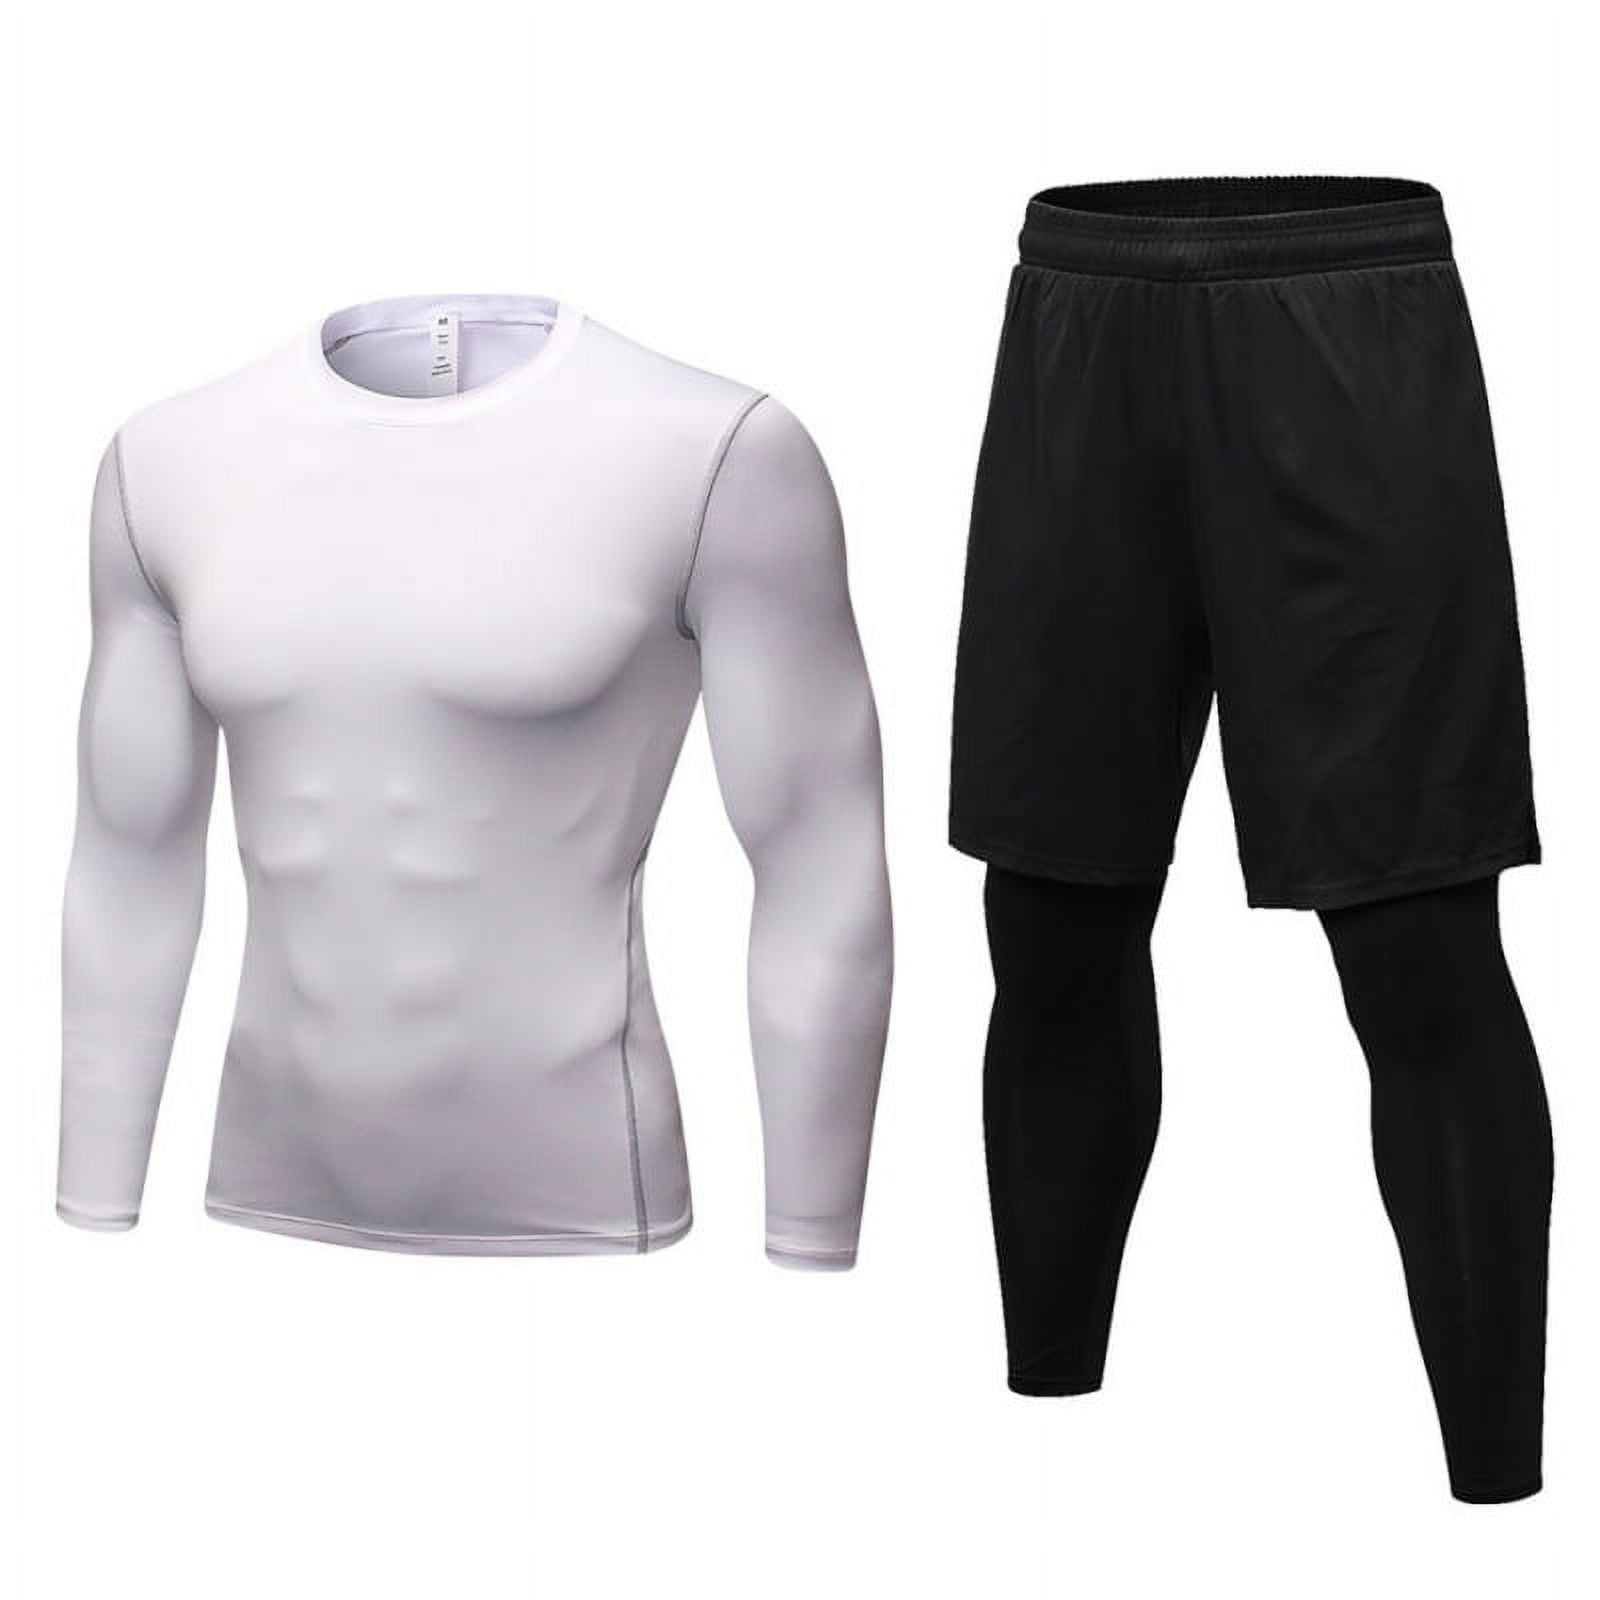 2 in 1 Compression Pants Mens basketball shorts Leggings sport Running  Shorts High Elastic Dry Fit Training Tights Jogging Pants